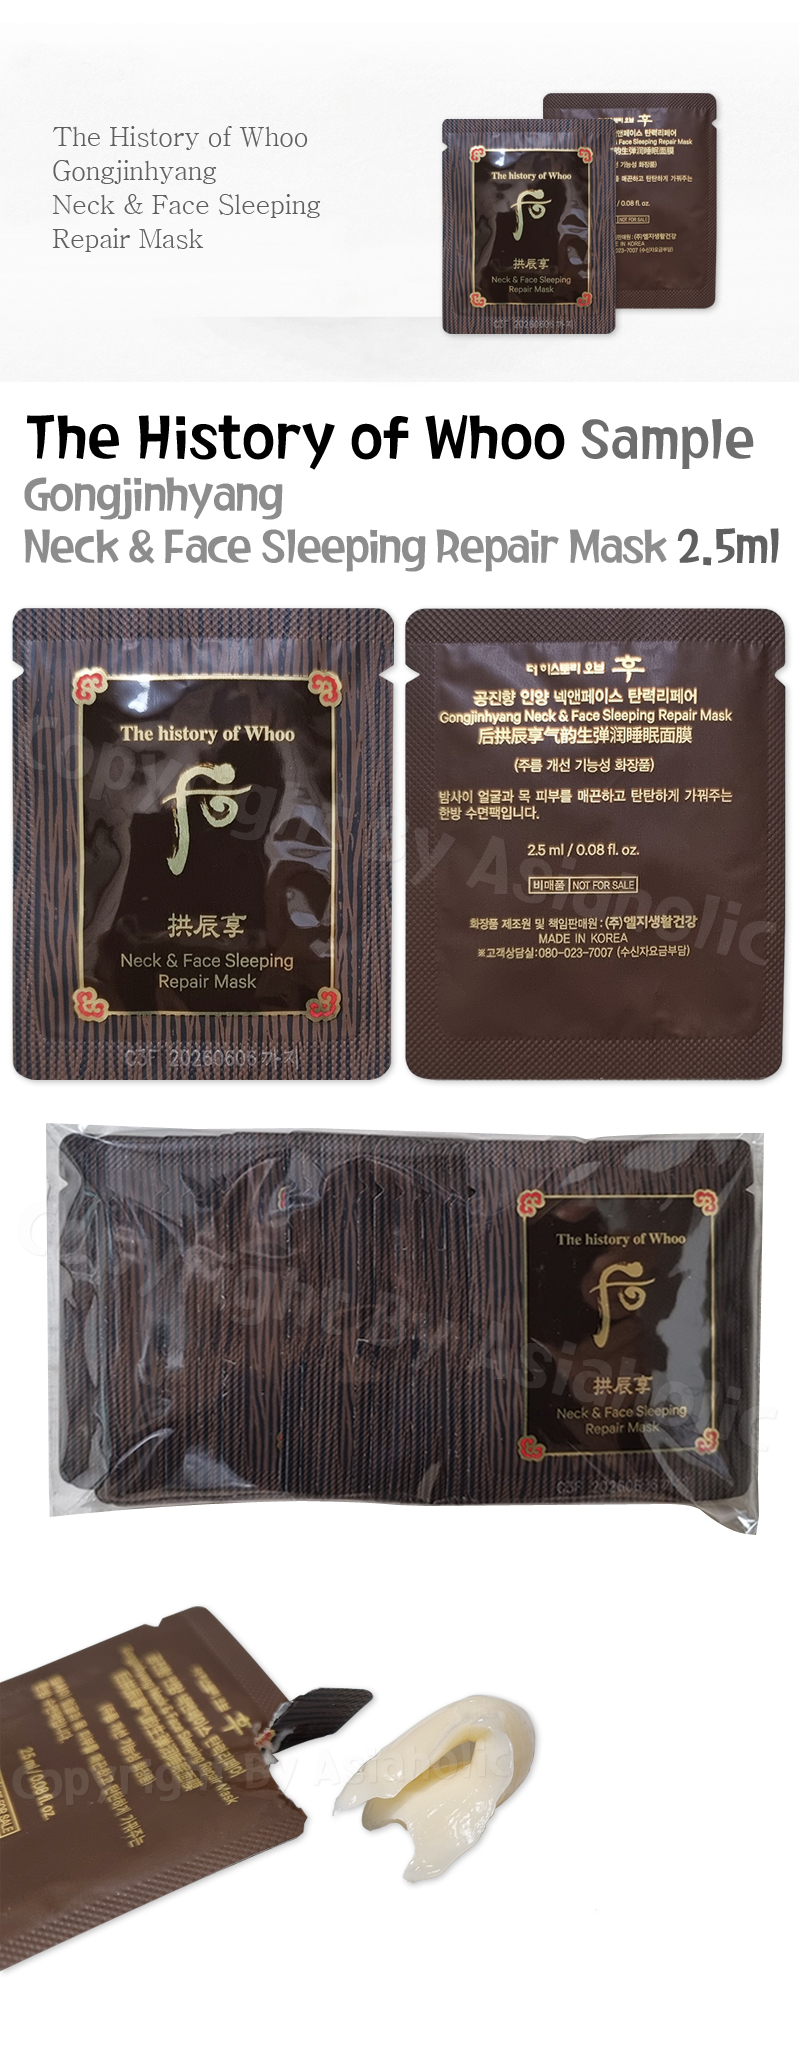 The history of Whoo Neck & Face Sleeping Repair Mask 2.5ml x 100pcs (250ml) Sample Newest Version